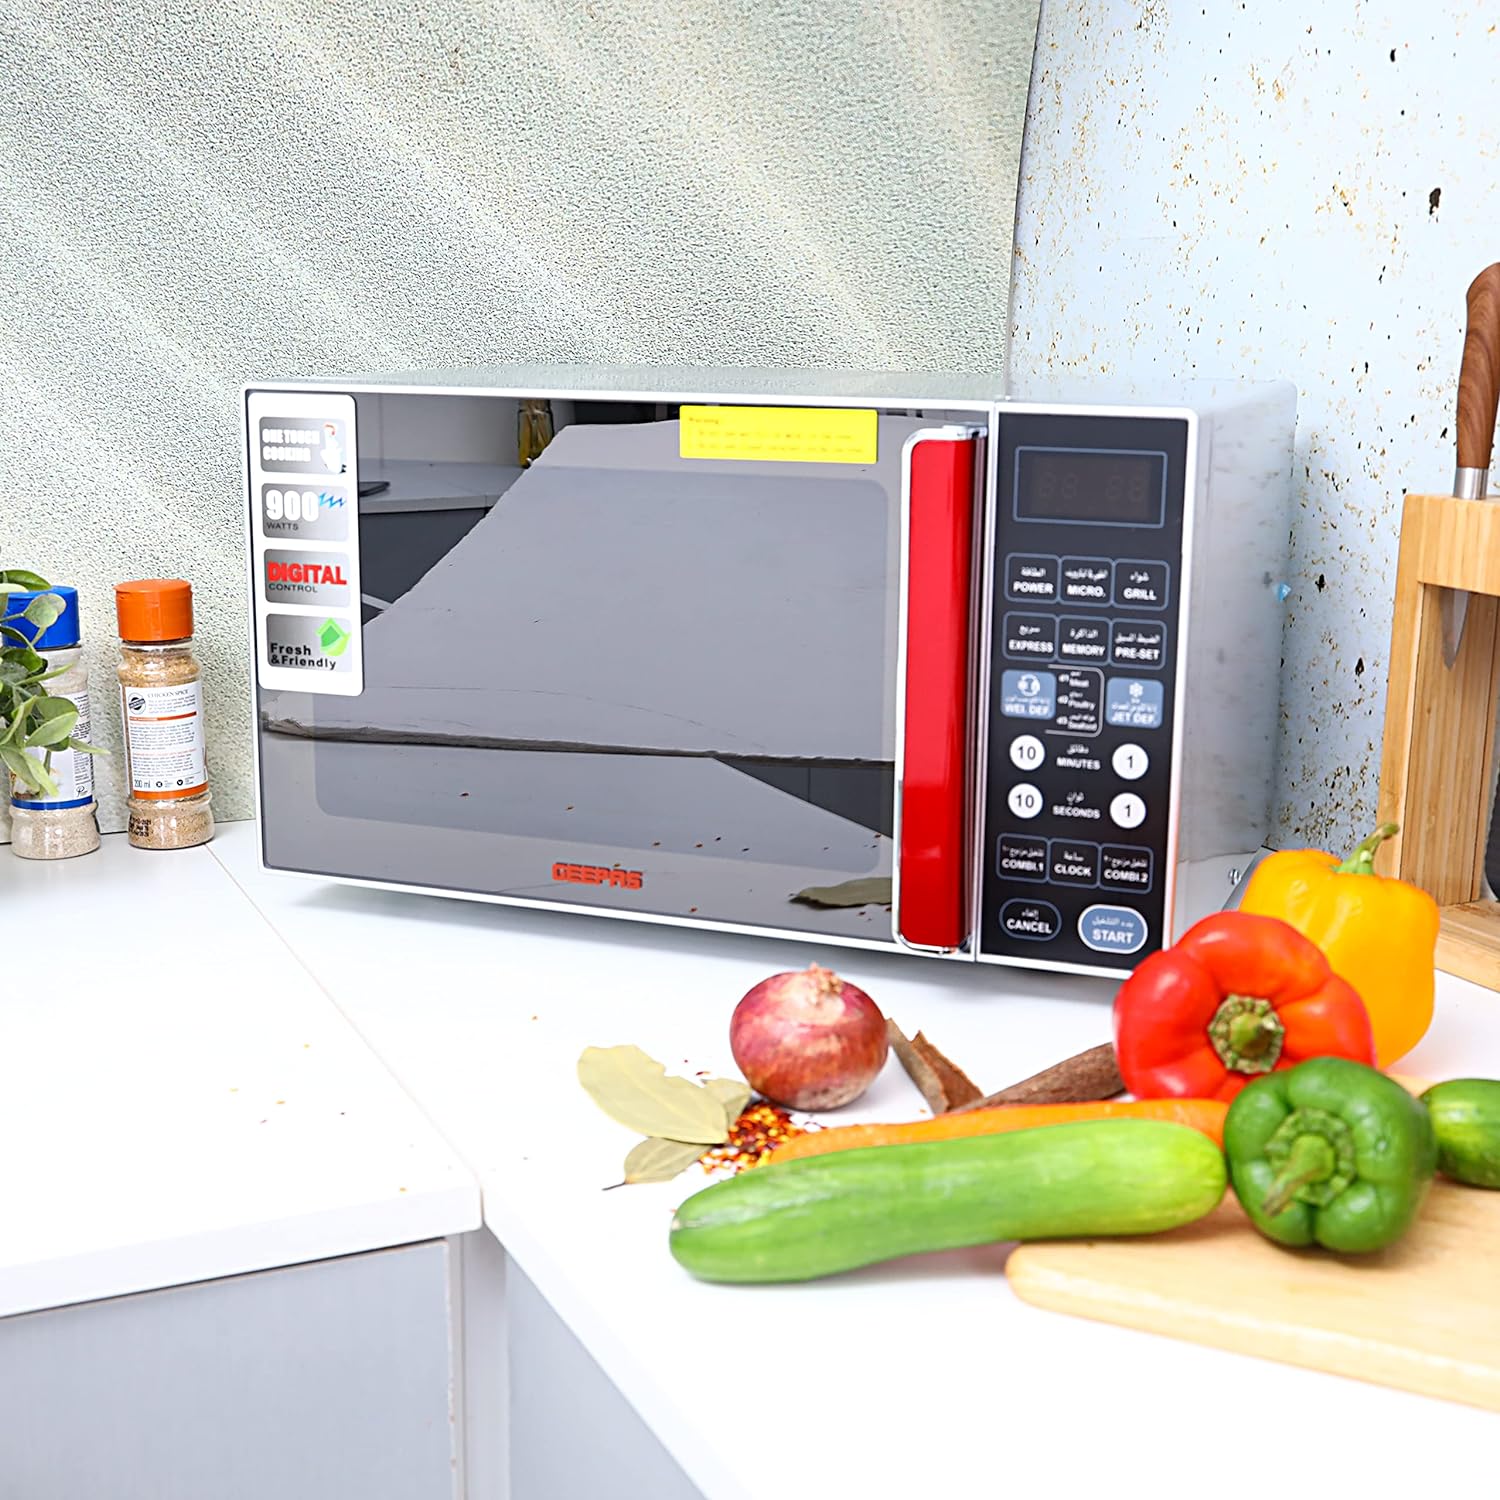 Geepas GMO1876 27L Digital Microwave Oven - 900W Microwave Oven | Reheating & Defrost Function